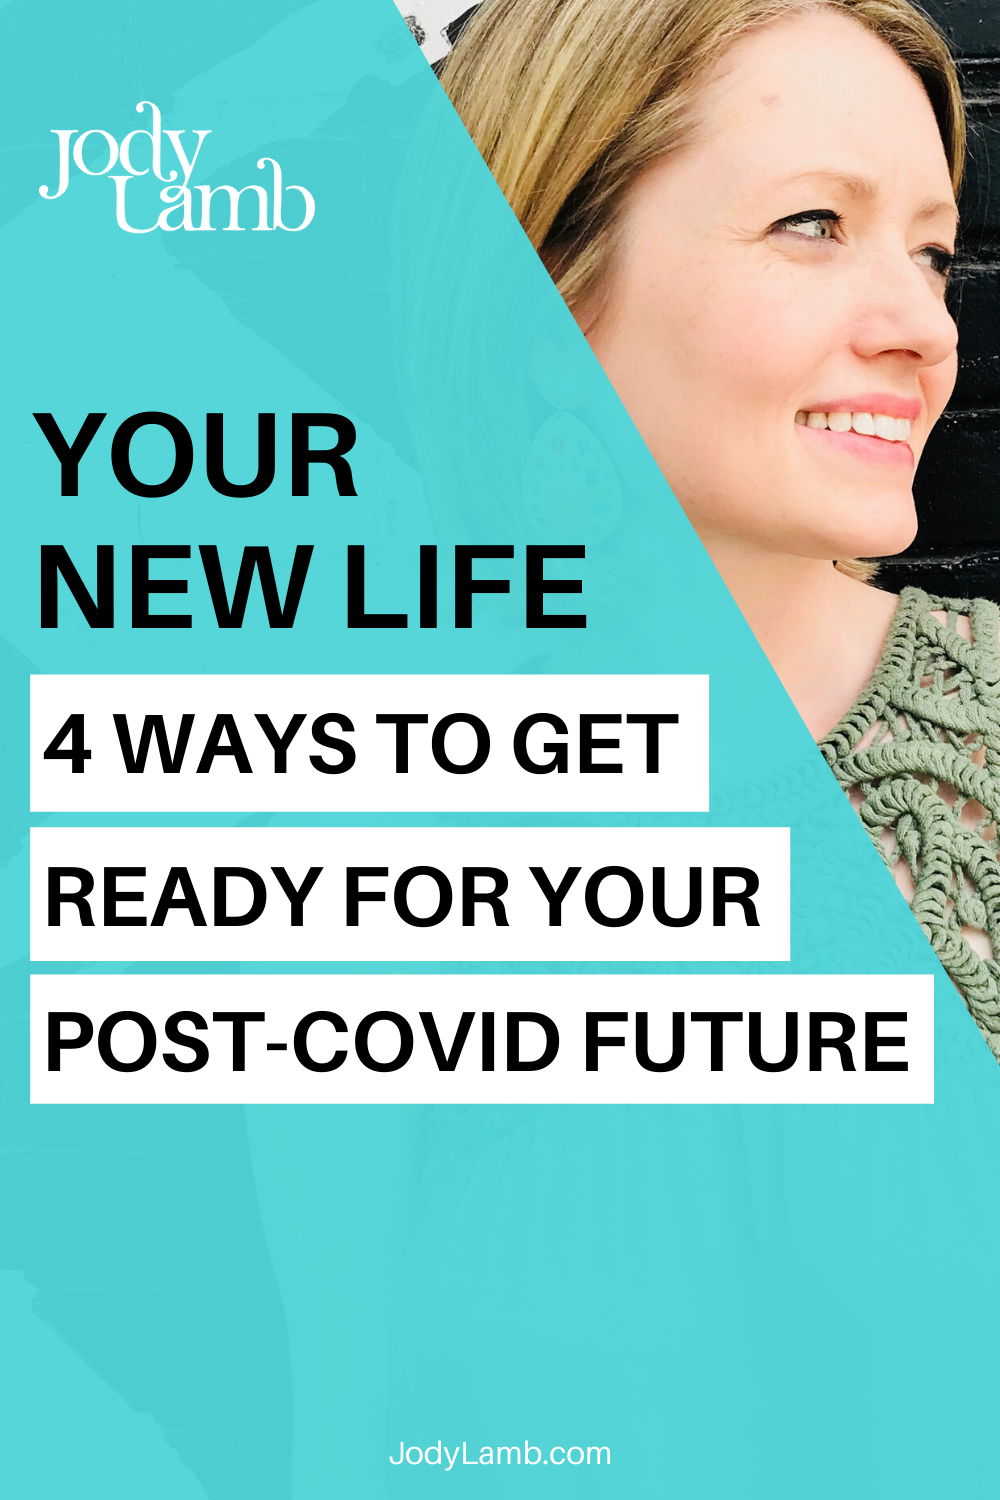 Jody Lamb - your new life 4 ways to get ready for your post-covid future